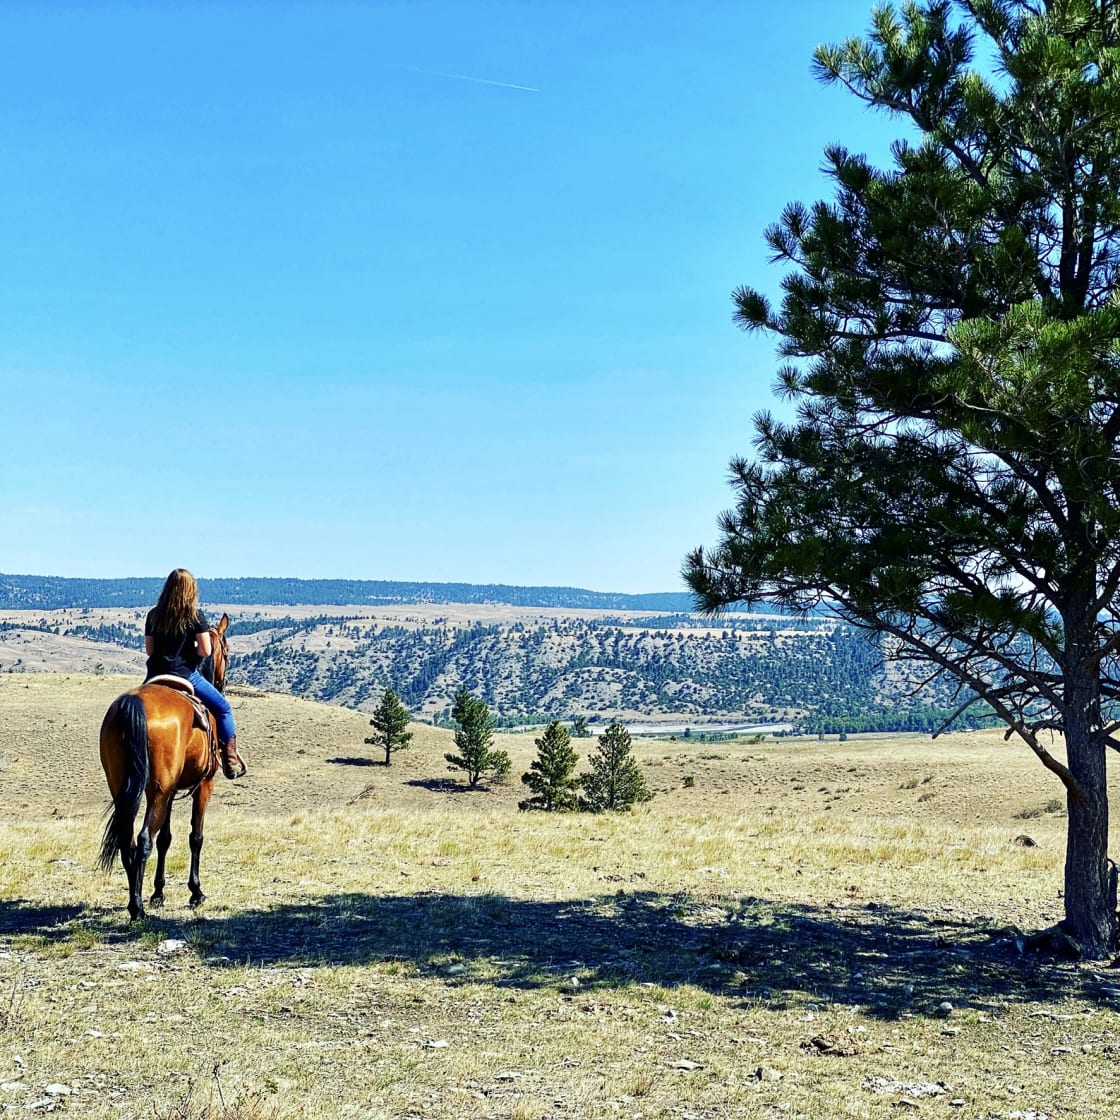 "On top of the world!" You can pitch a tent right under that tree and enjoy views of the Yellowstone River, Bear Tooth Mountains & the Crazy Mountains